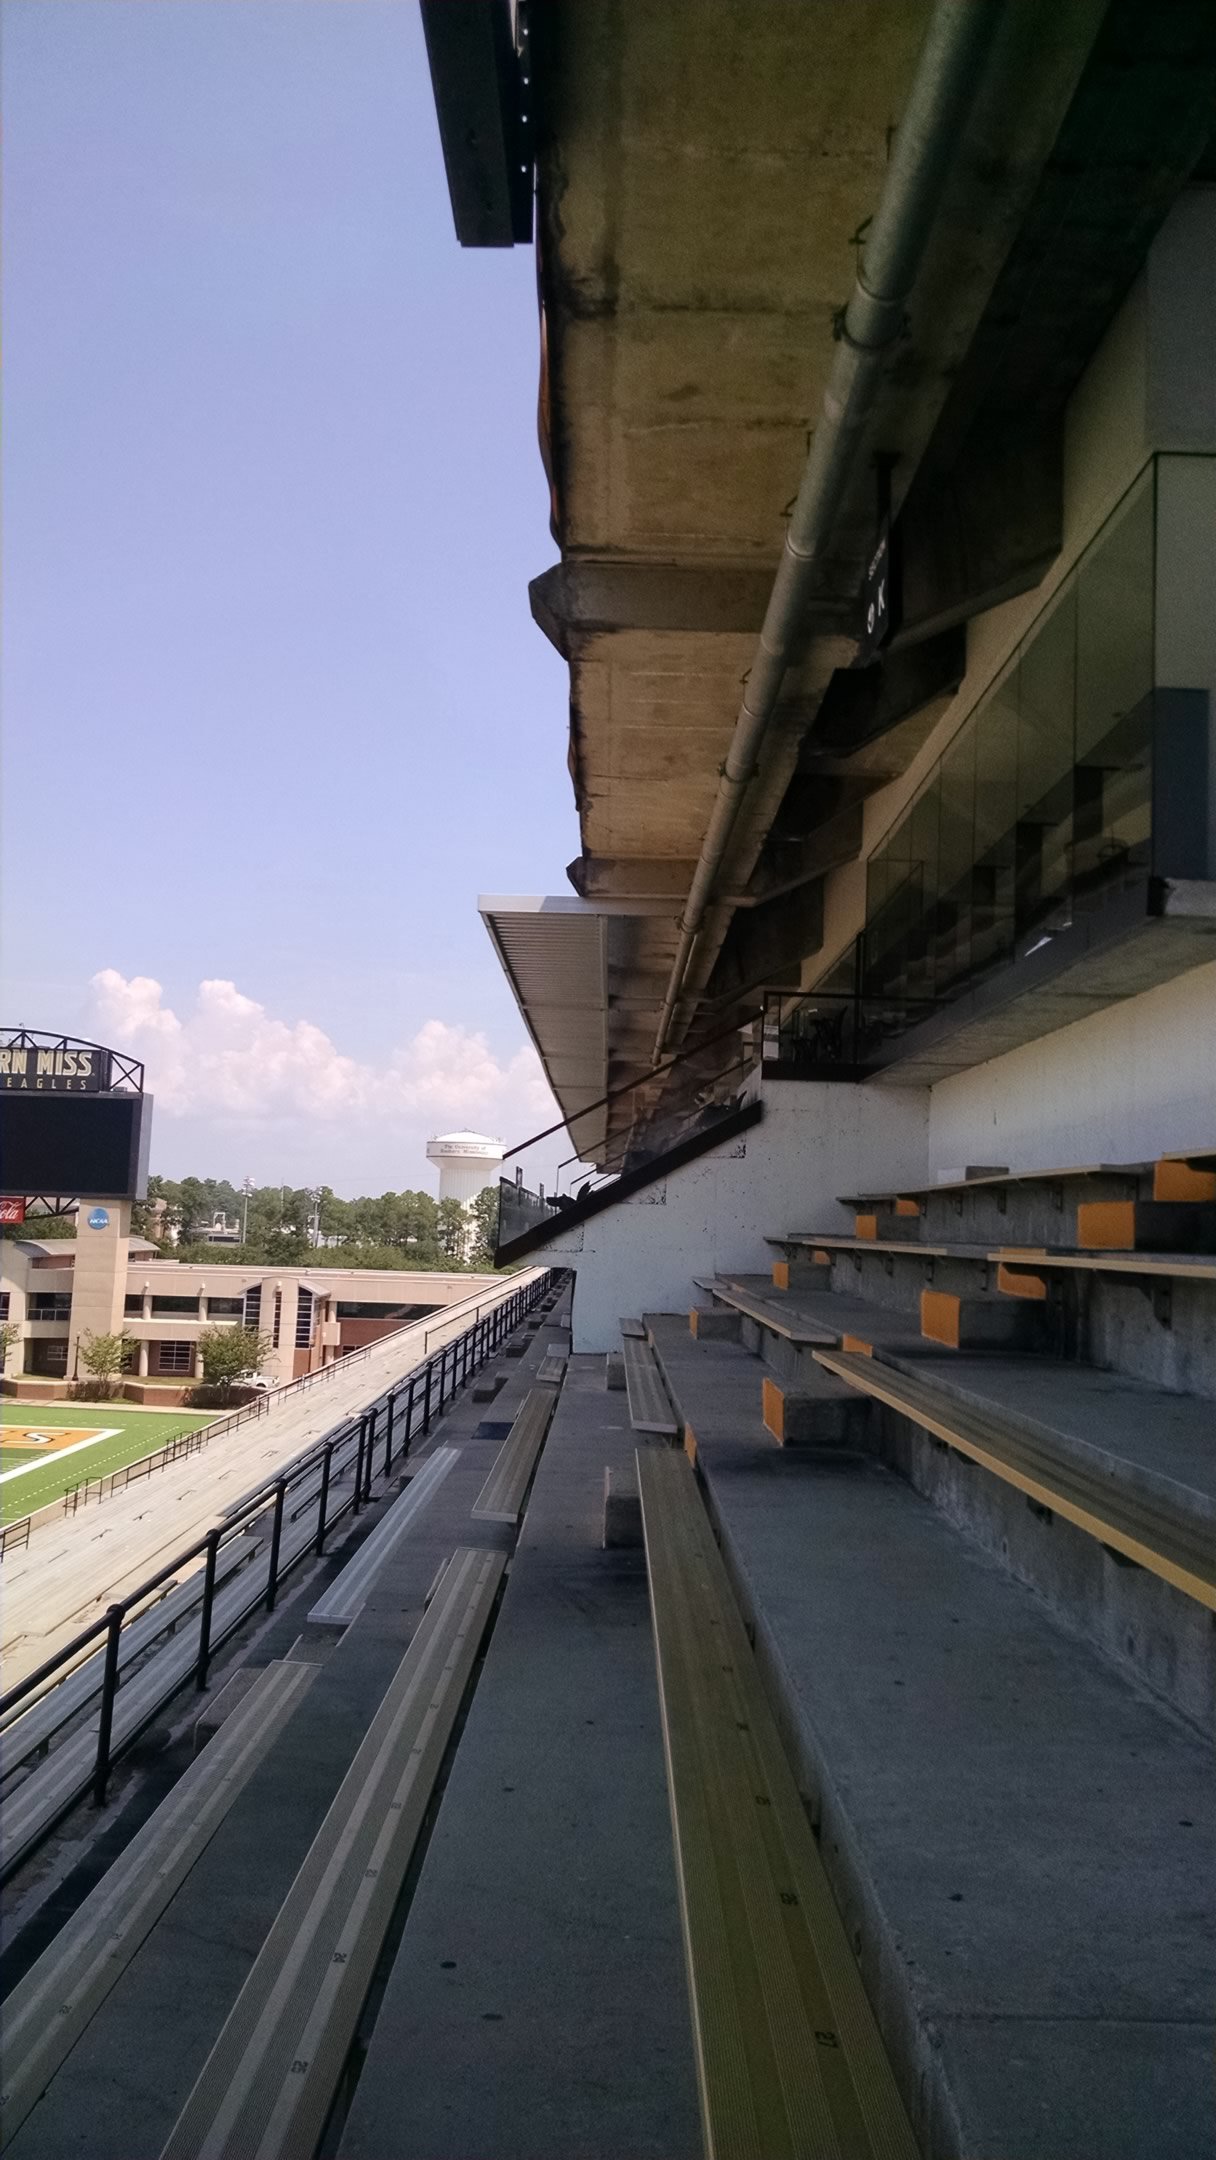 Southern Mississippi Football Stadium Seating Chart